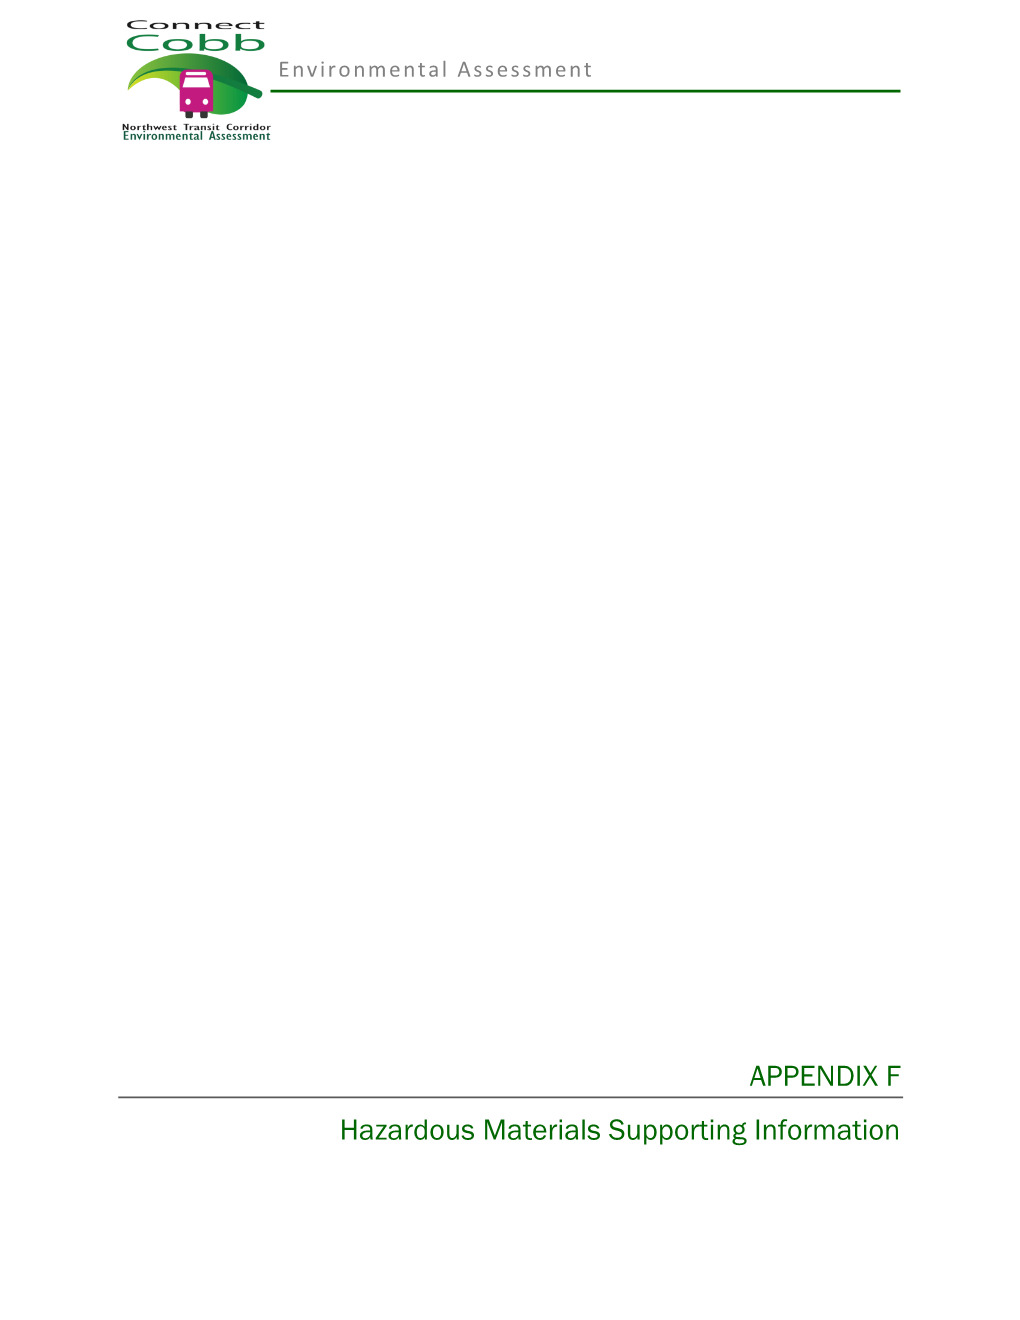 APPENDIX F Hazardous Materials Supporting Information Environmental Assessment Page F-1